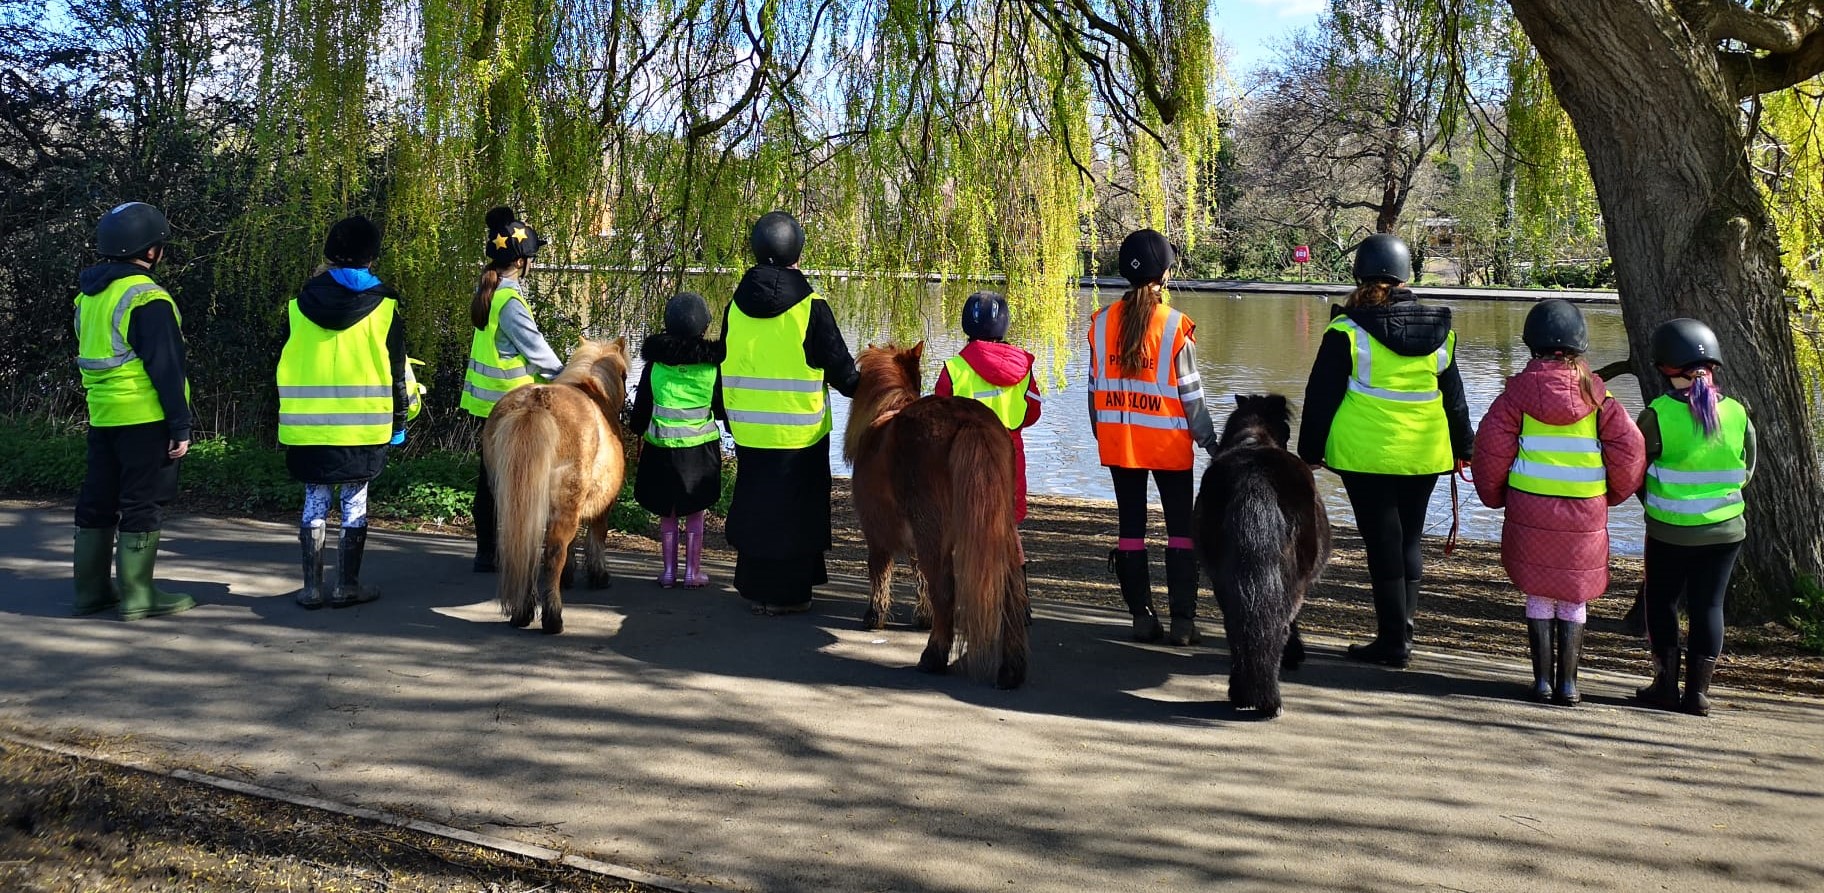 Summerfield Stables use funding to engage youngsters with horses